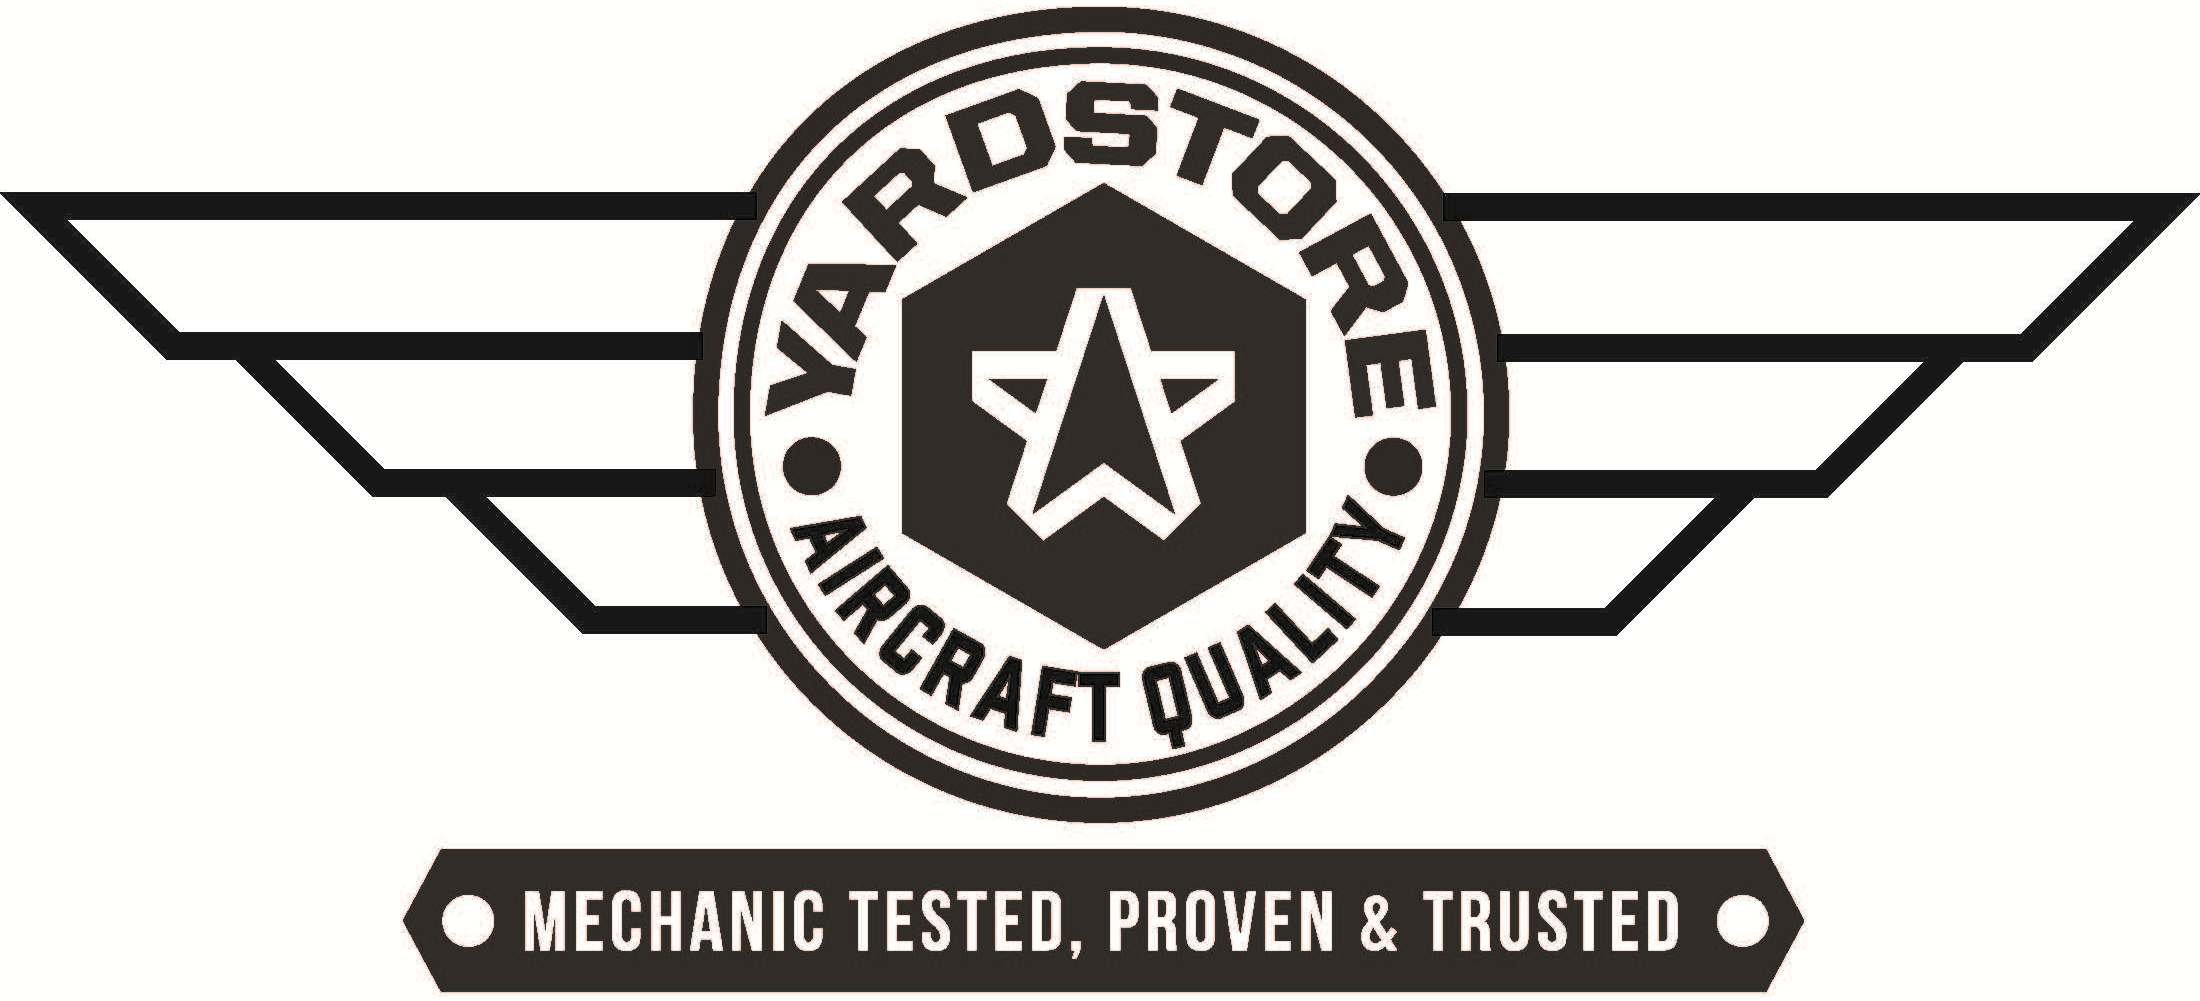 Yardstore Aircraft Quality Approved